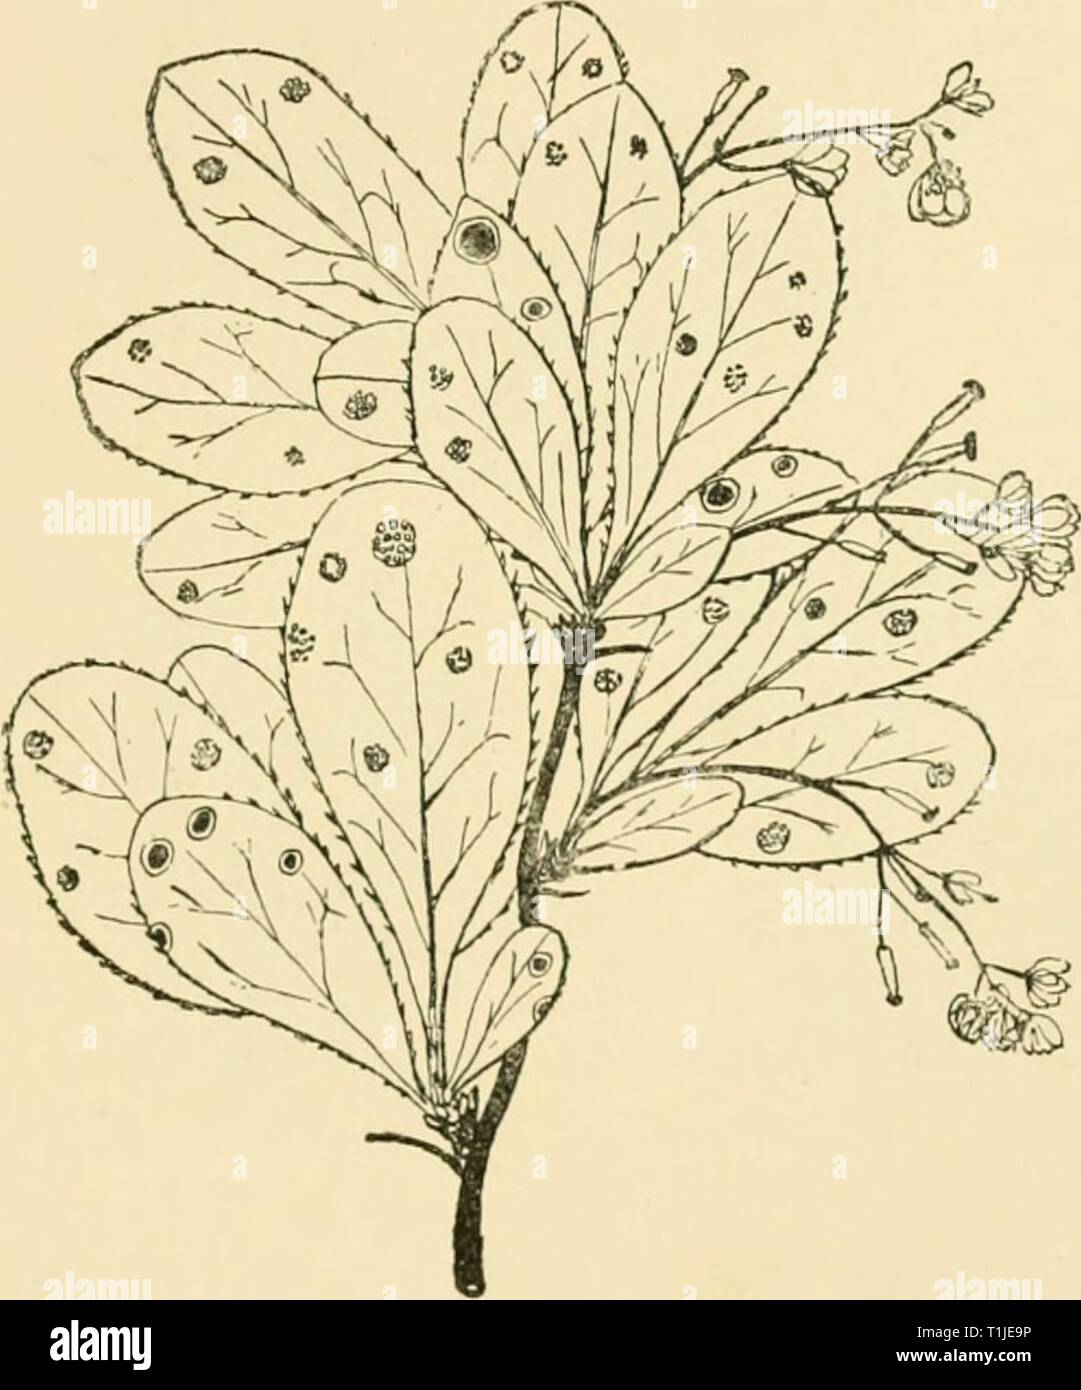 Diseases of plants induced by Diseases of plants induced by cryptogamic parasites; introduction to the study of pathogenic Fungi, slime-Fungi, bacteria, & Algae  diseasesofplants00tube Year: 1897  pucciNiA. 343- hyphae forming the bottom of the uecidium-cup. These hyphae give rise to numerous short sporophores, from each of which a single long chain of spores is abjointed in basipetal succession, the spores being at first separated by temporary intermediate cells. The sporophores round the margin of each aecidium do not, however, give off spores; they also produce chains of cells basipetally,  Stock Photo